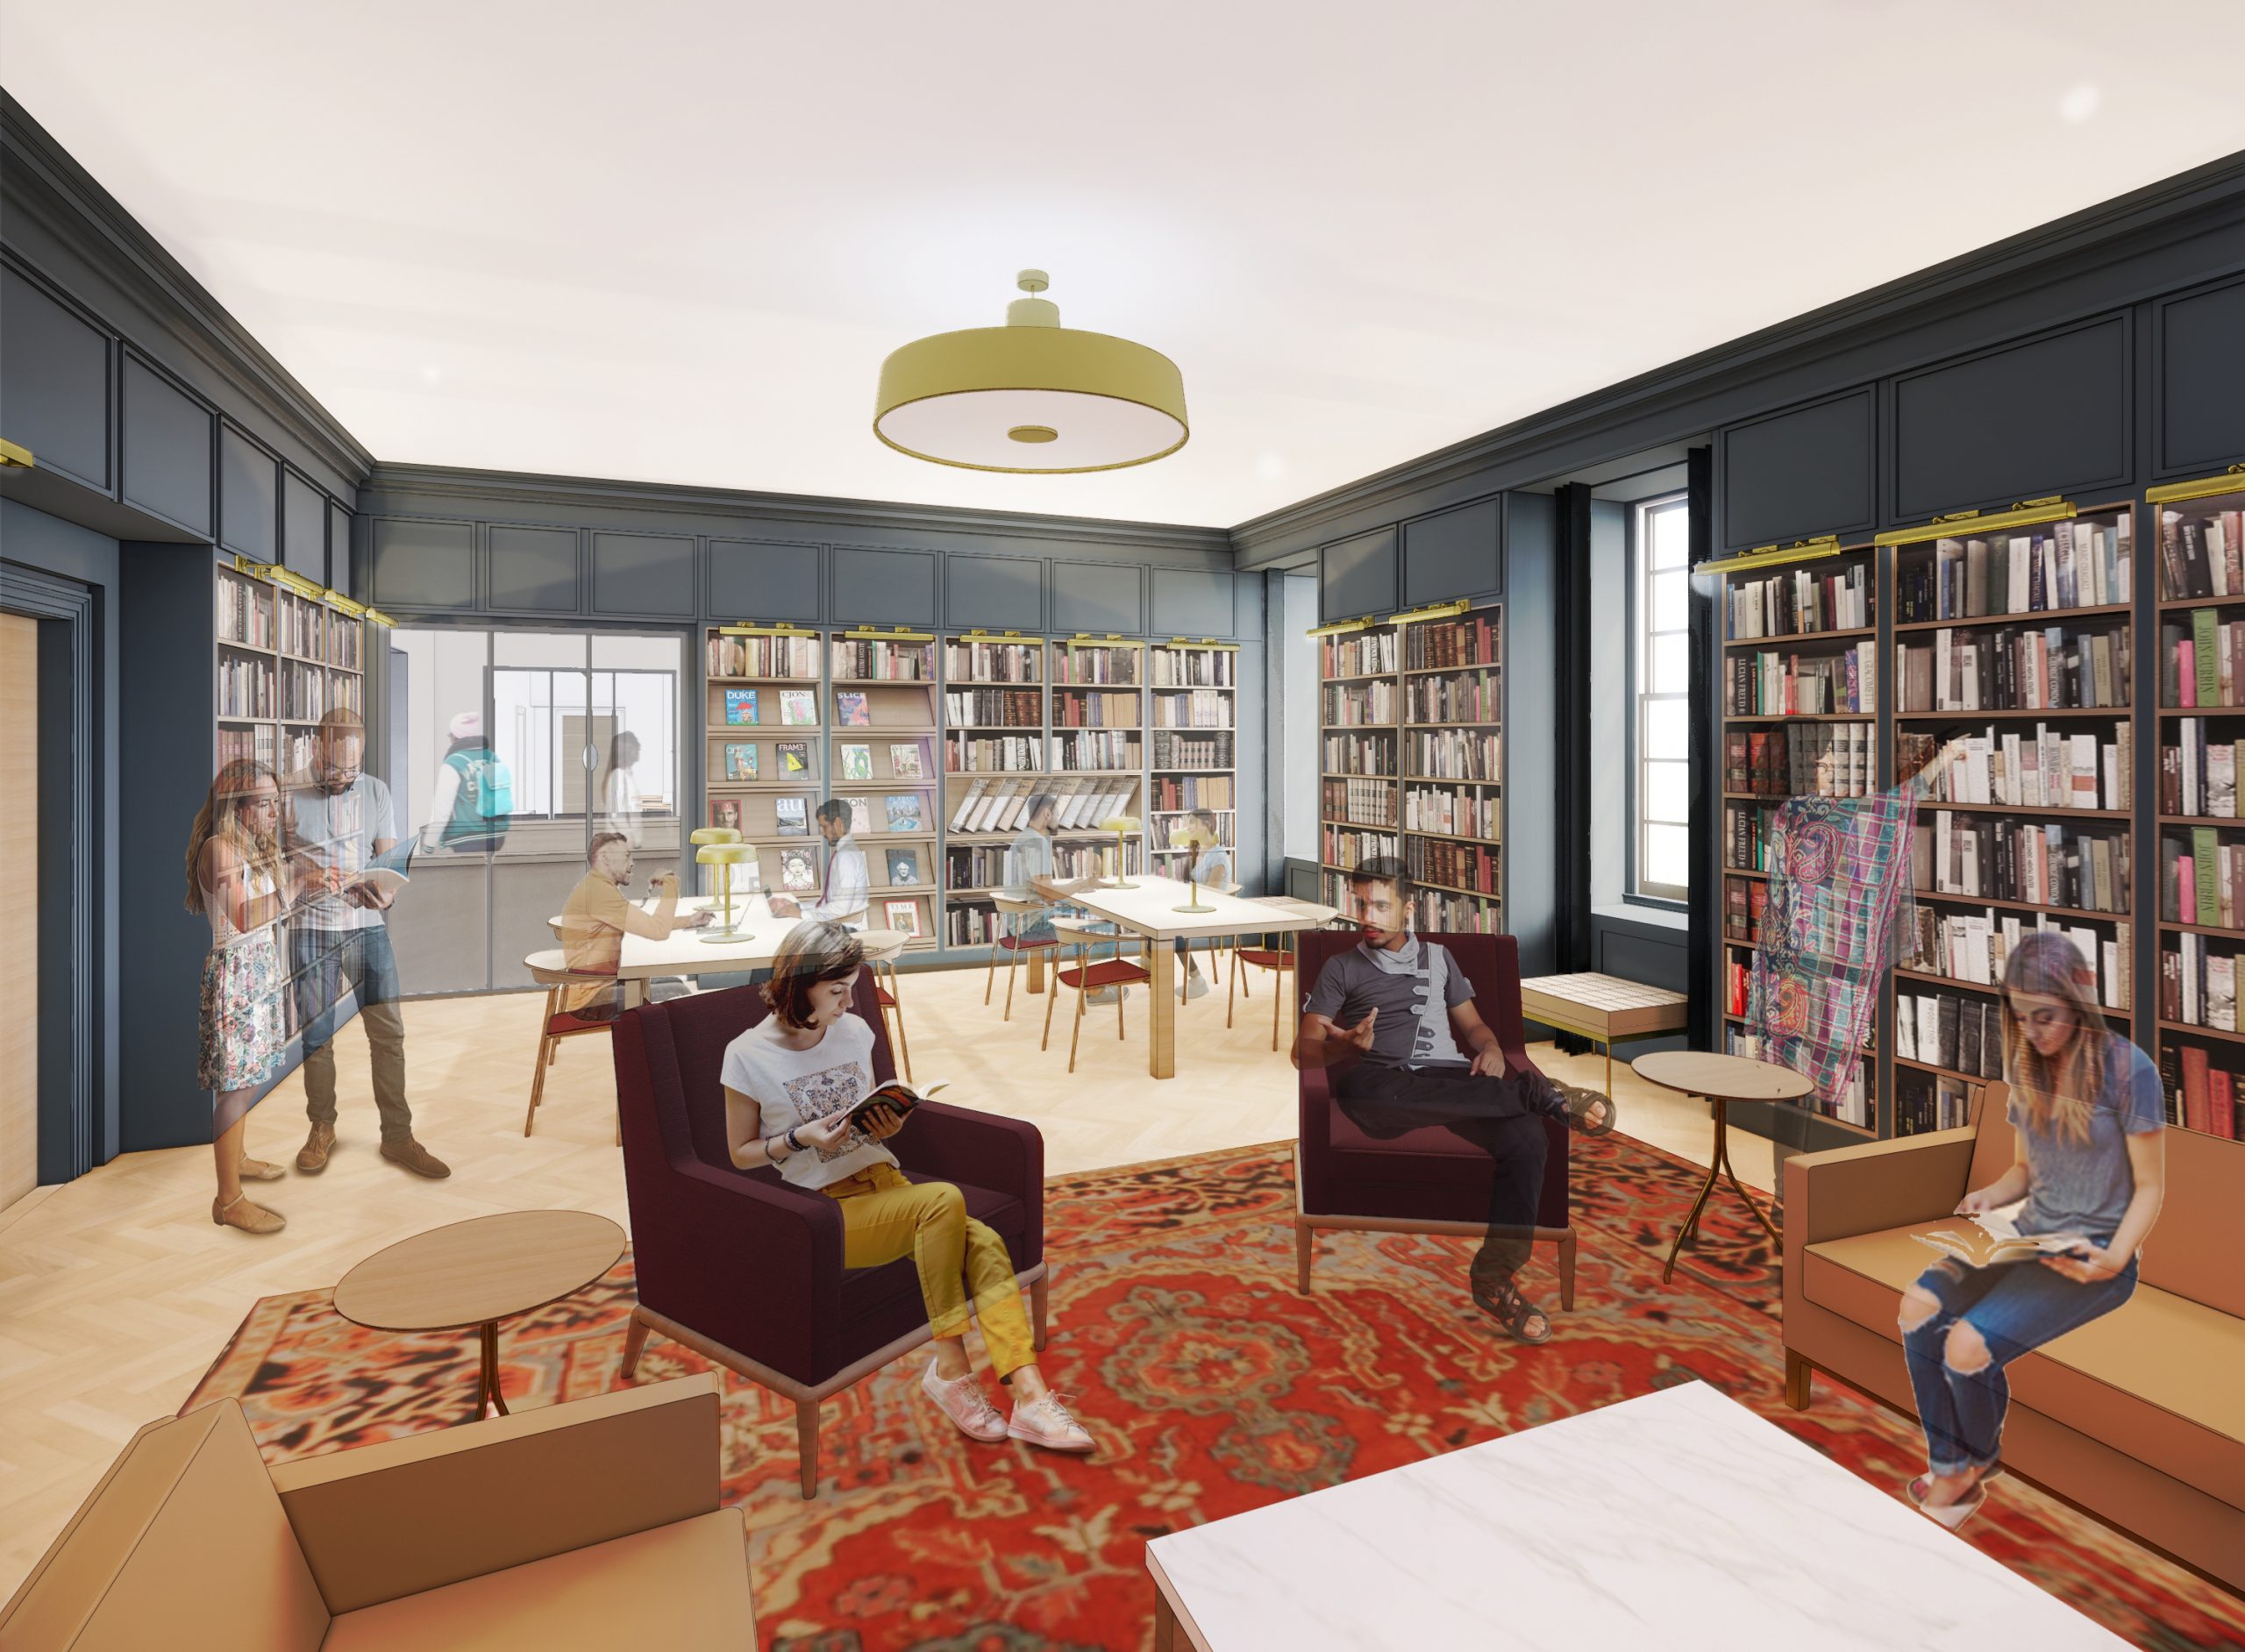 Rendering of the Booklover's Room, showing people browsing books and reading.